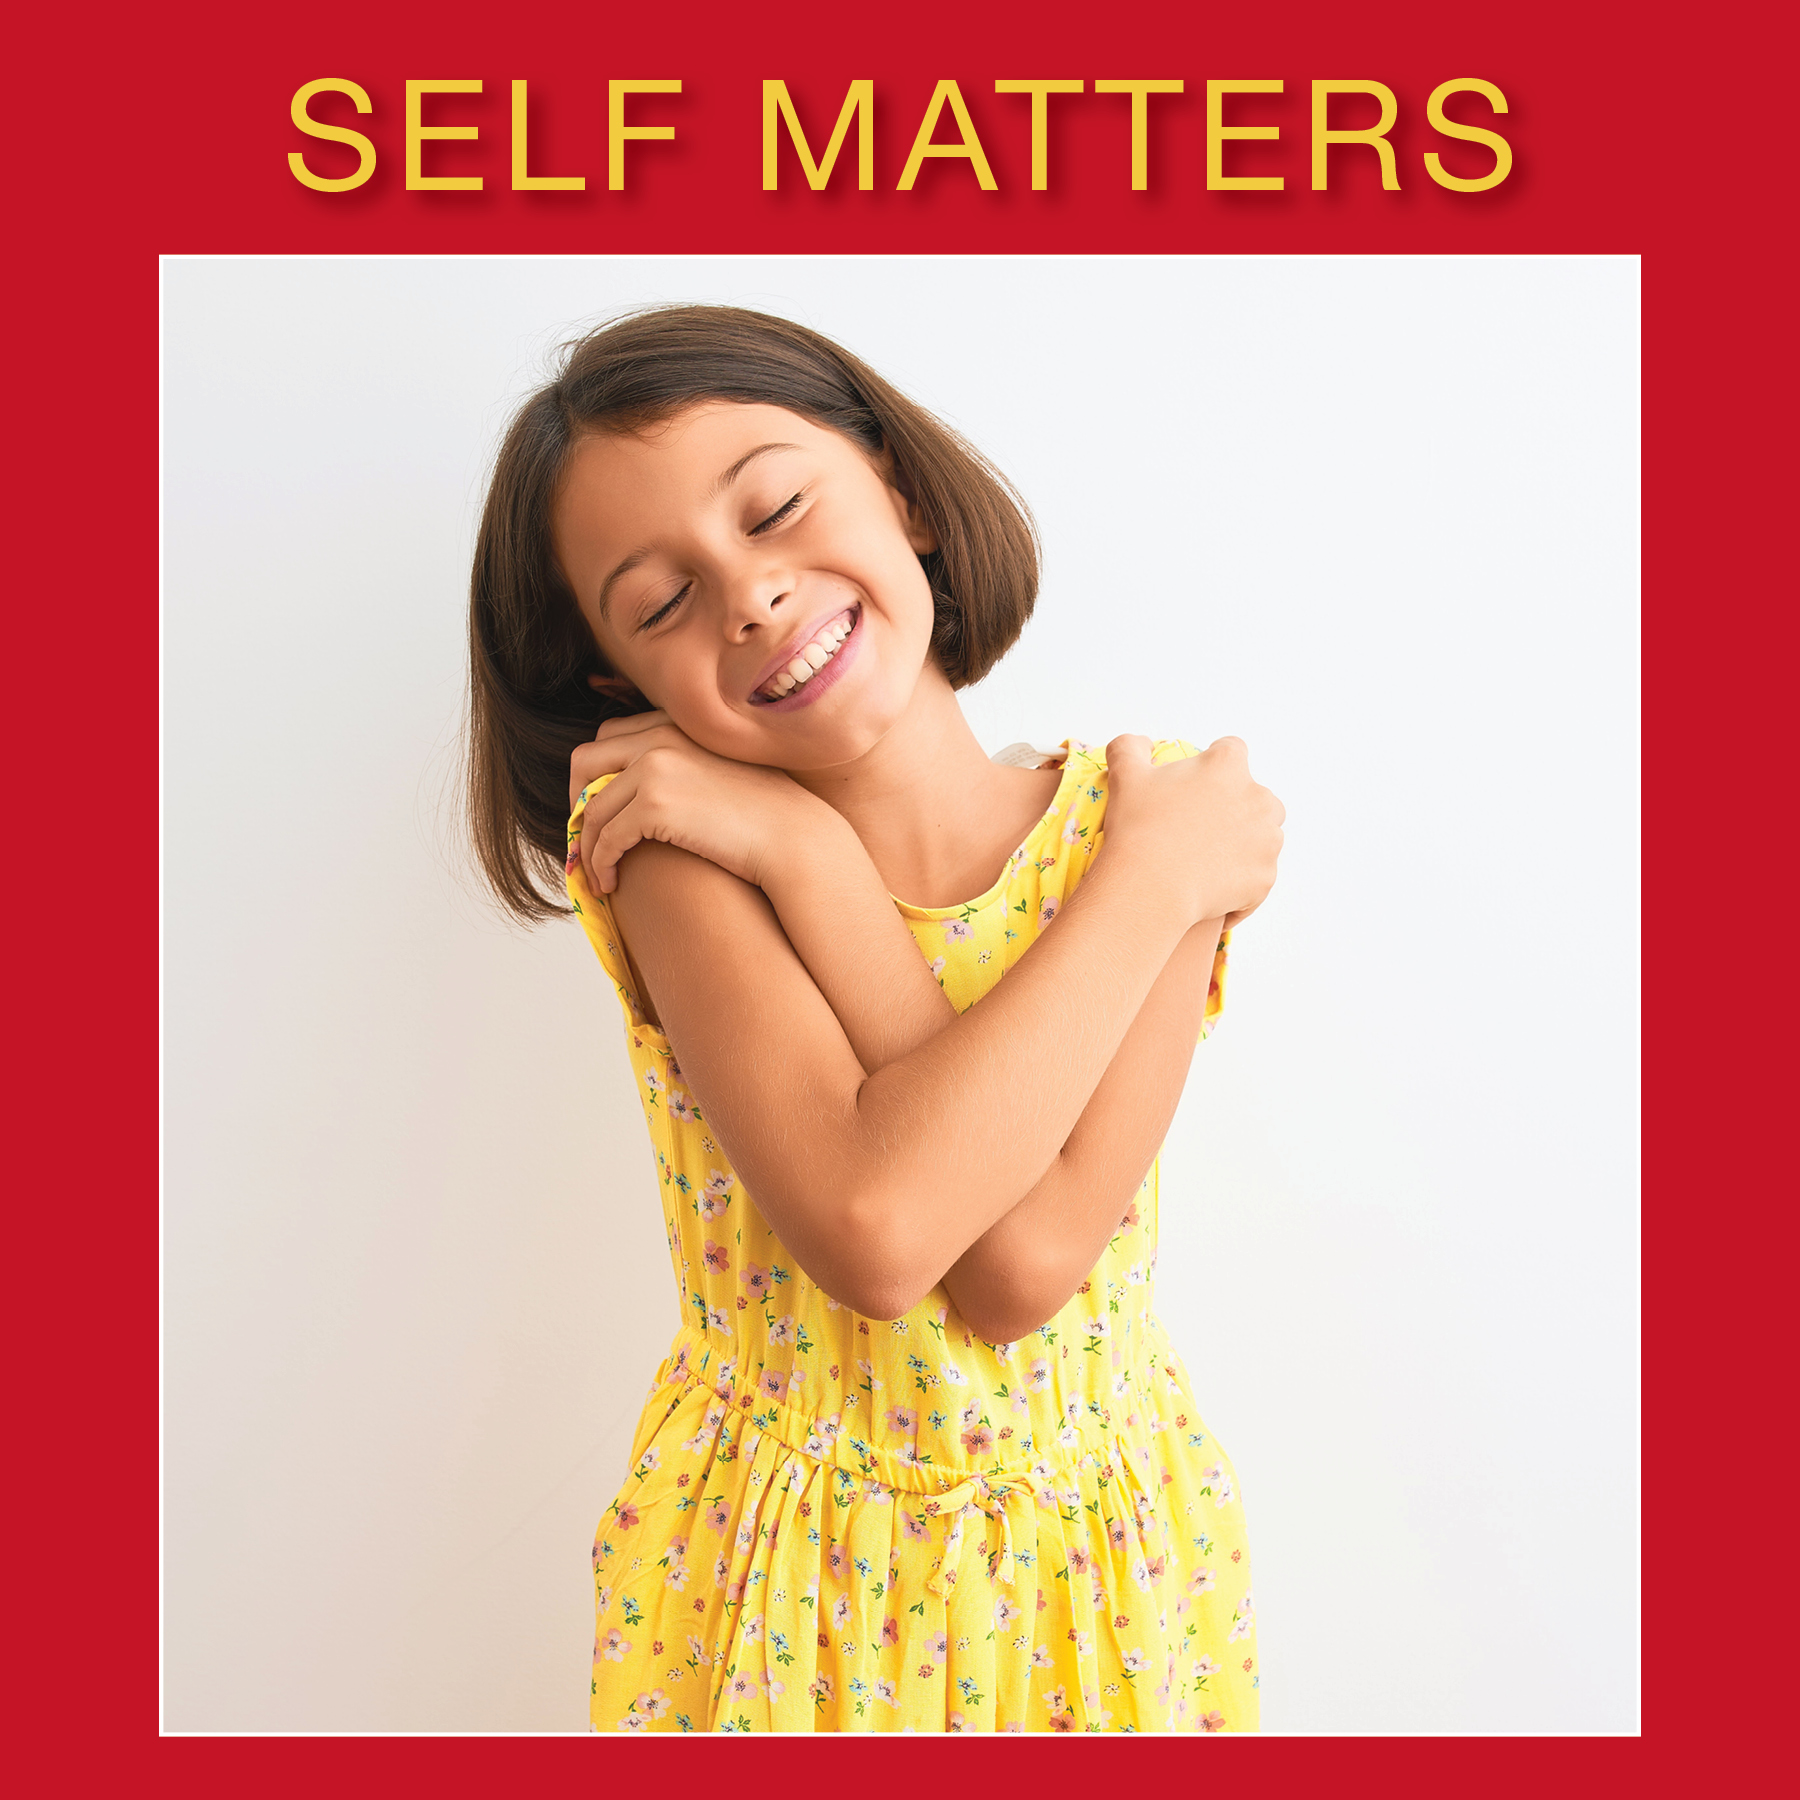 Self Matters: Who Are You?